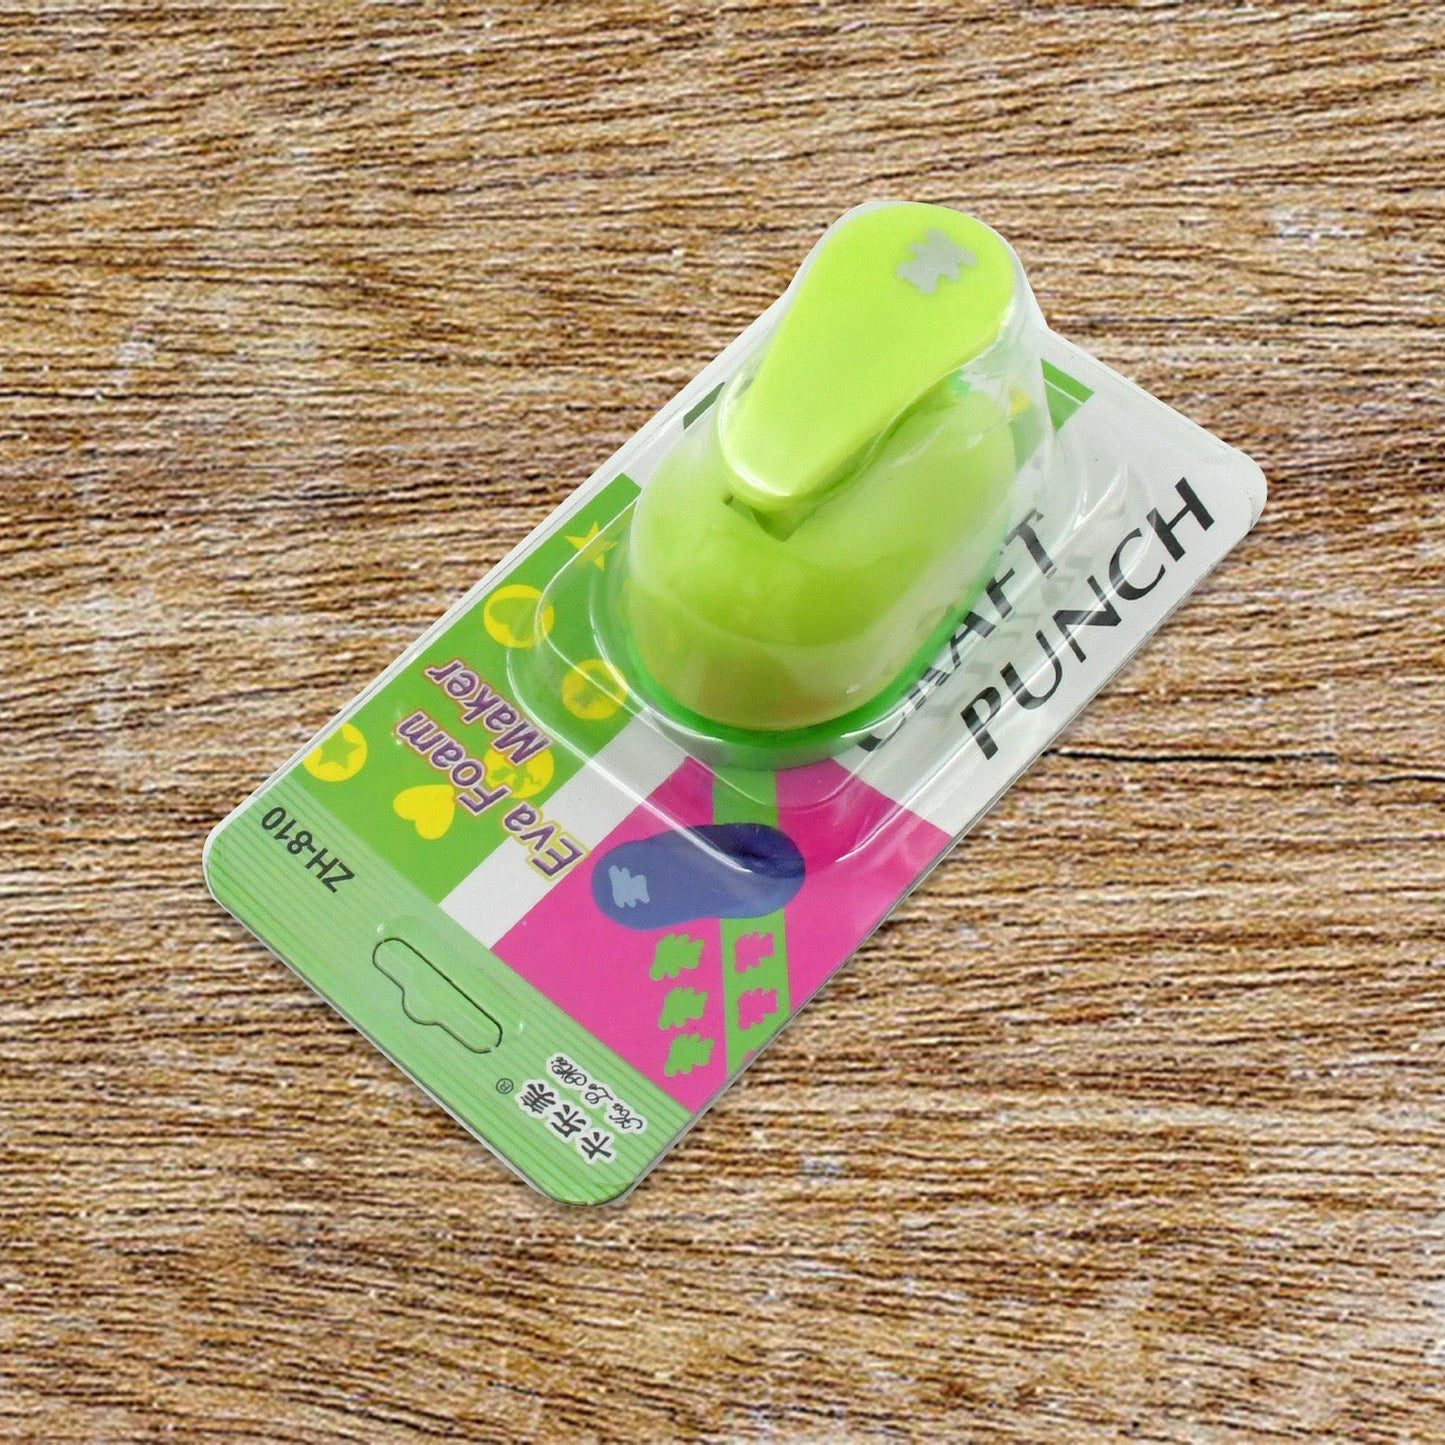 4561 Hole Punch, Kids Paper Craft Punches Decorative, Hole Puncher for Crafting Scrapbook Nail Designs, for Kids Adults